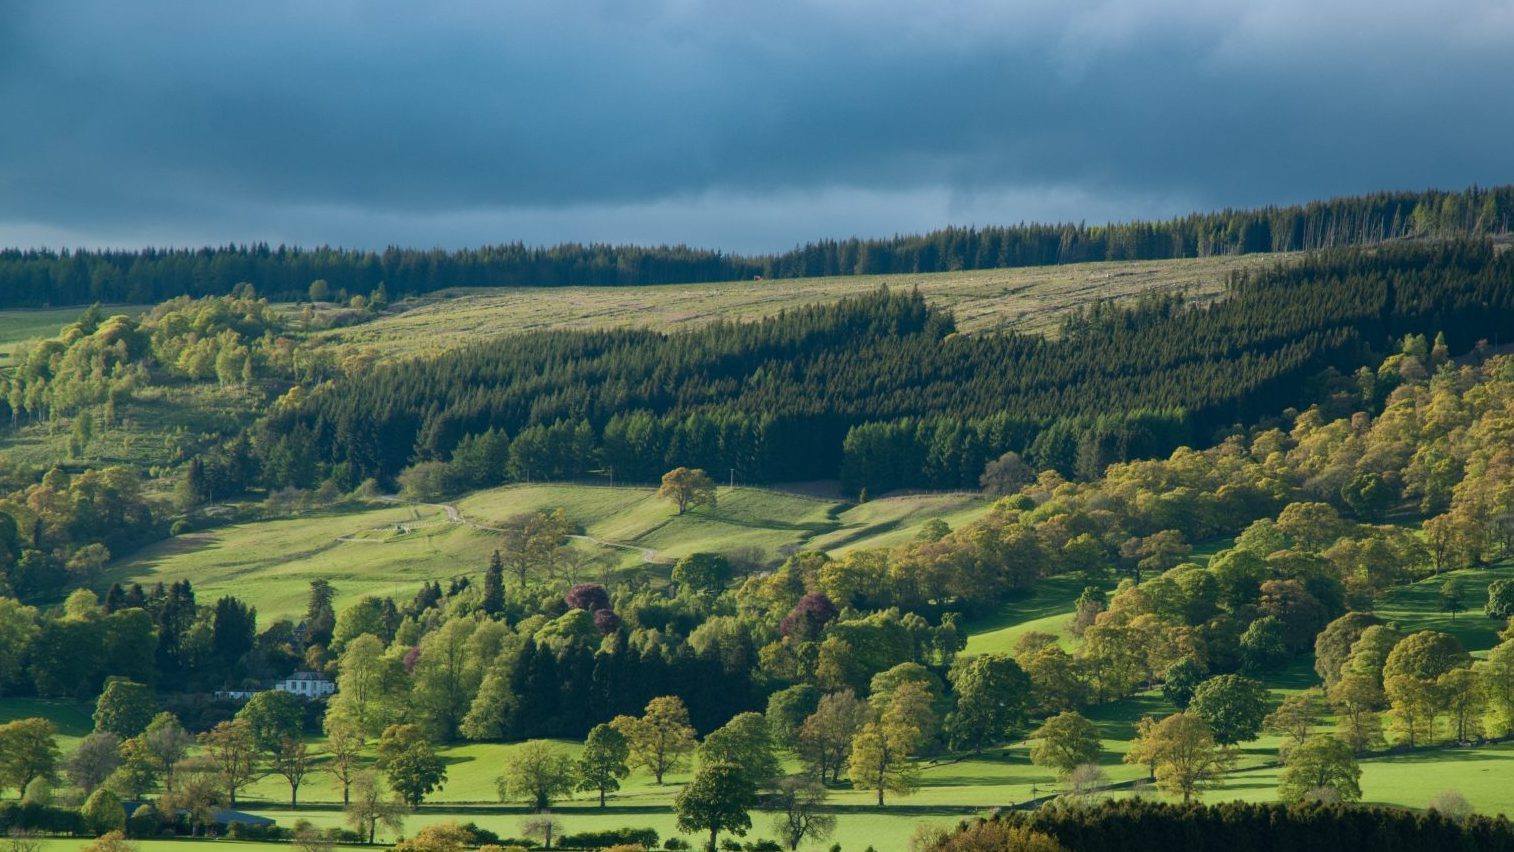 Photo of a sweeping Scottish landscape of rolling green hills and trees, under a moody stormy sky